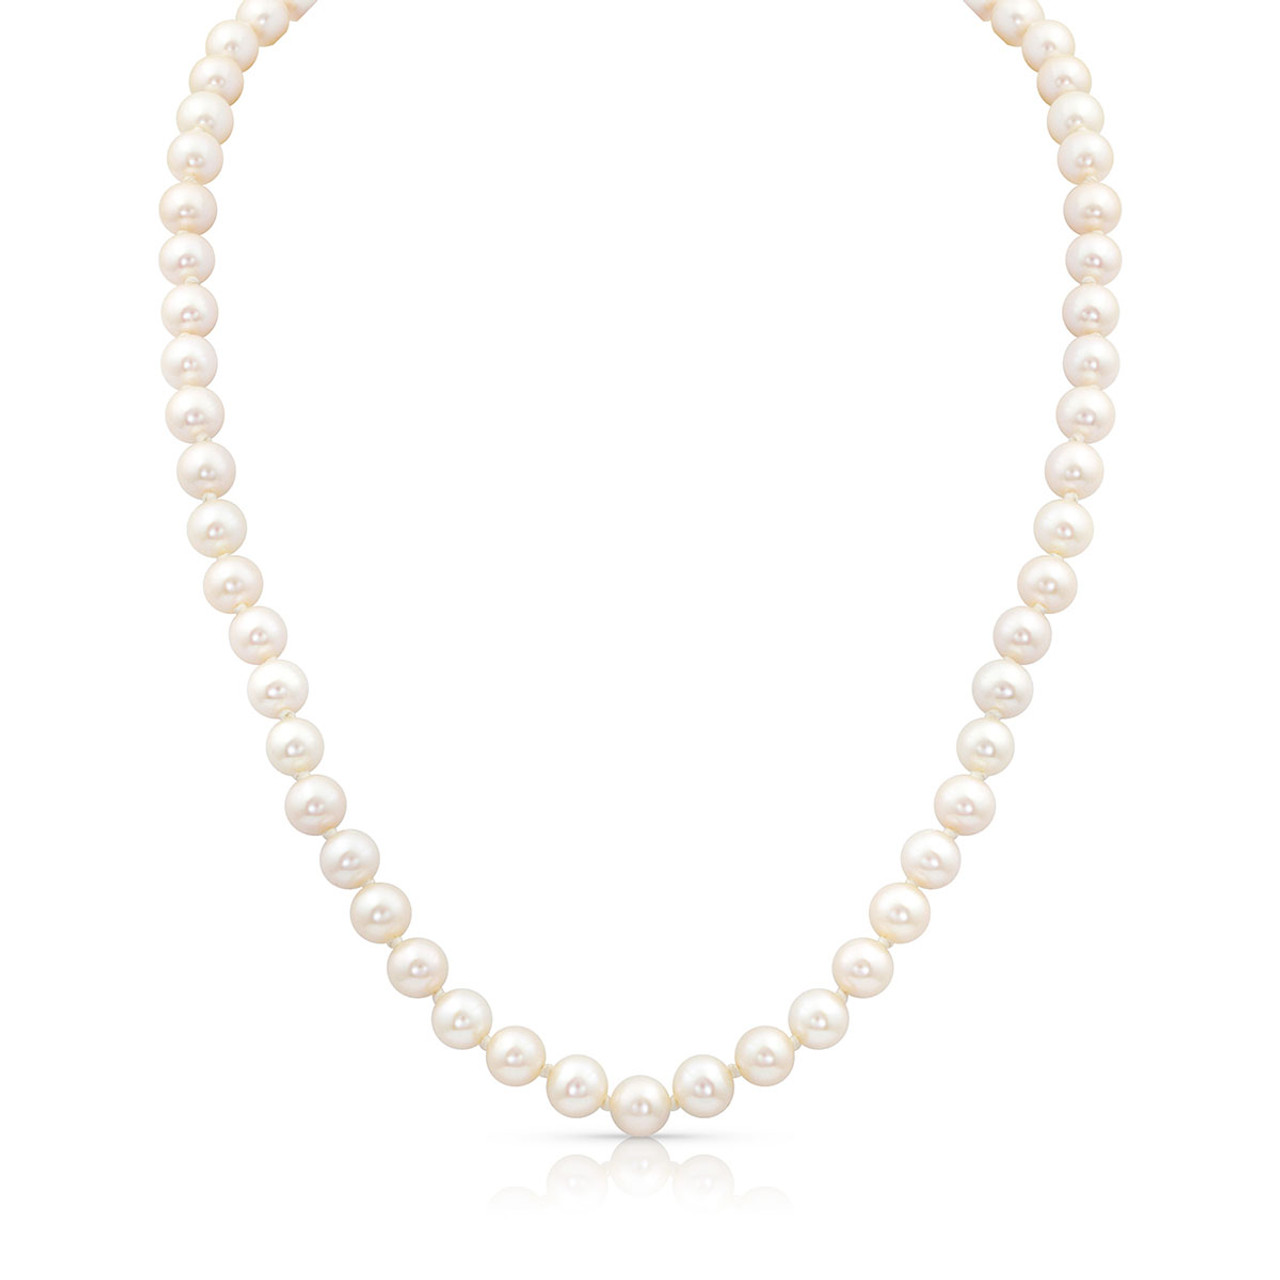 Pearl Necklace with Gold Ring Clasp - Zjoosh